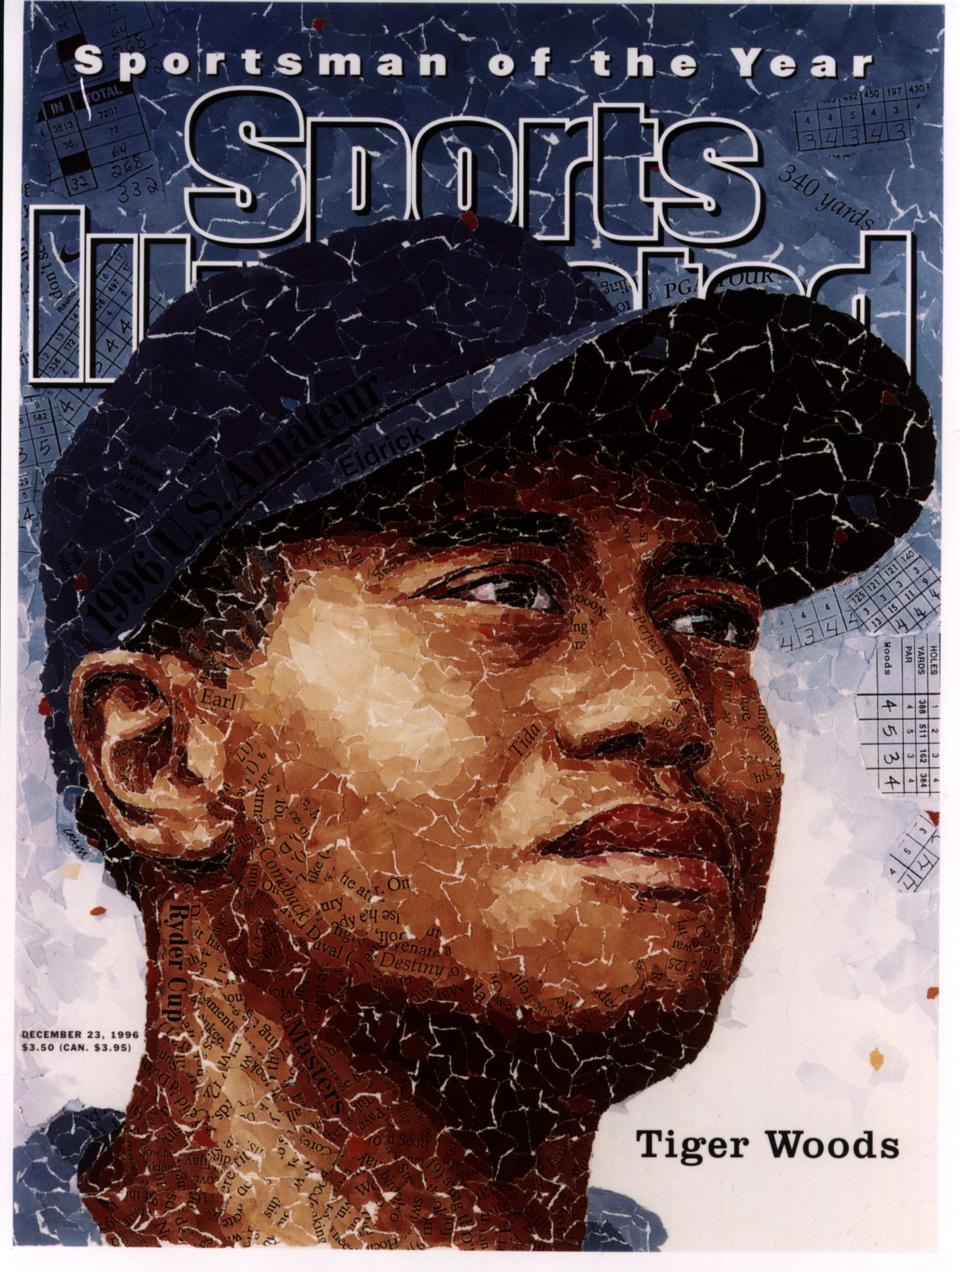 Golfer Tiger Woods appears on the Sports Illustrated cover for Dec. 23, 1996 as SI's Sportsman of the Year.